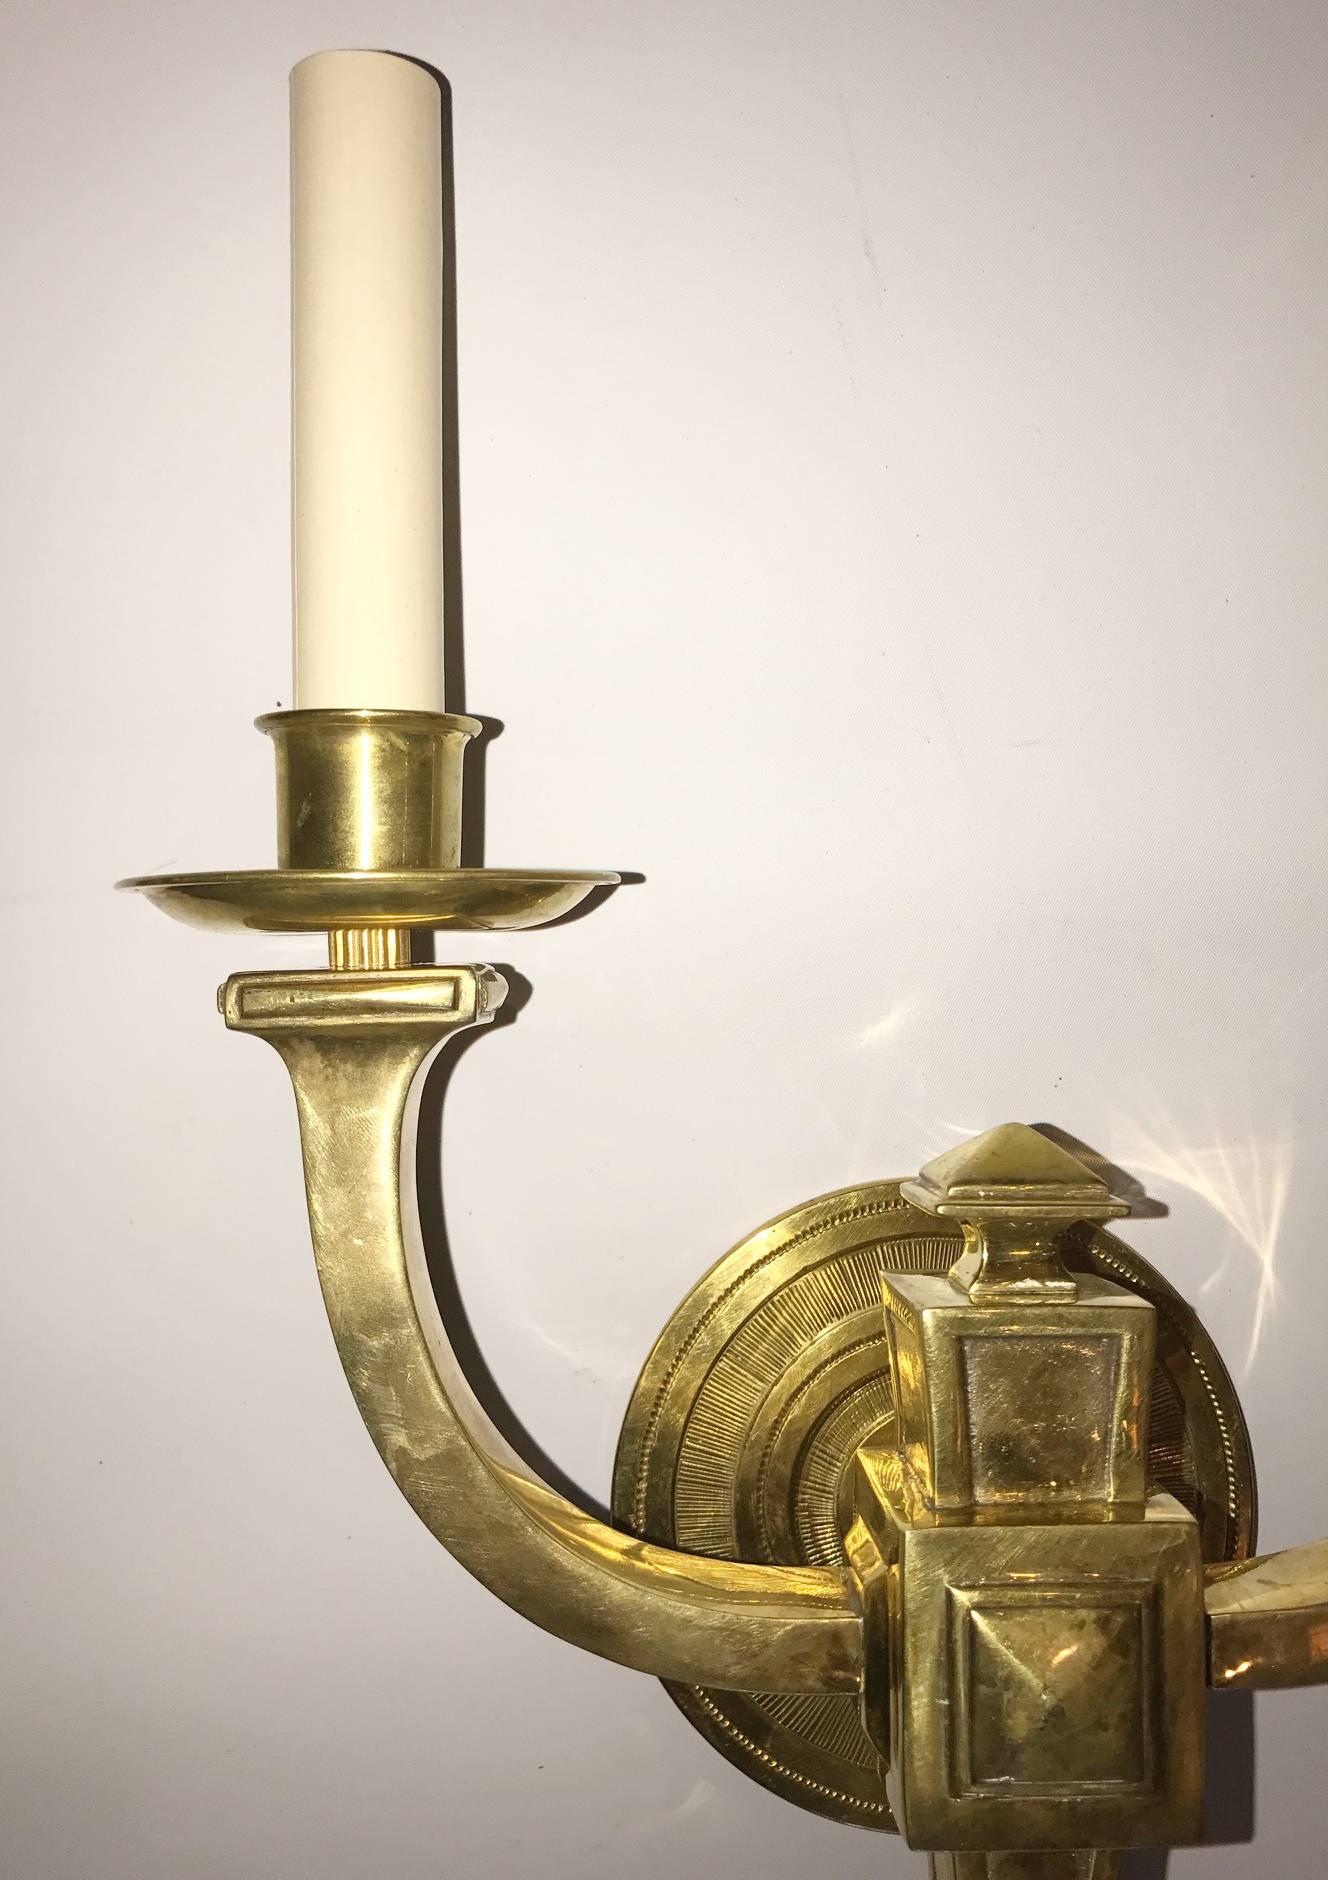 Set of ten American, 1930s neoclassic sconces with two lights.
Sold in pairs

Measurements:
14